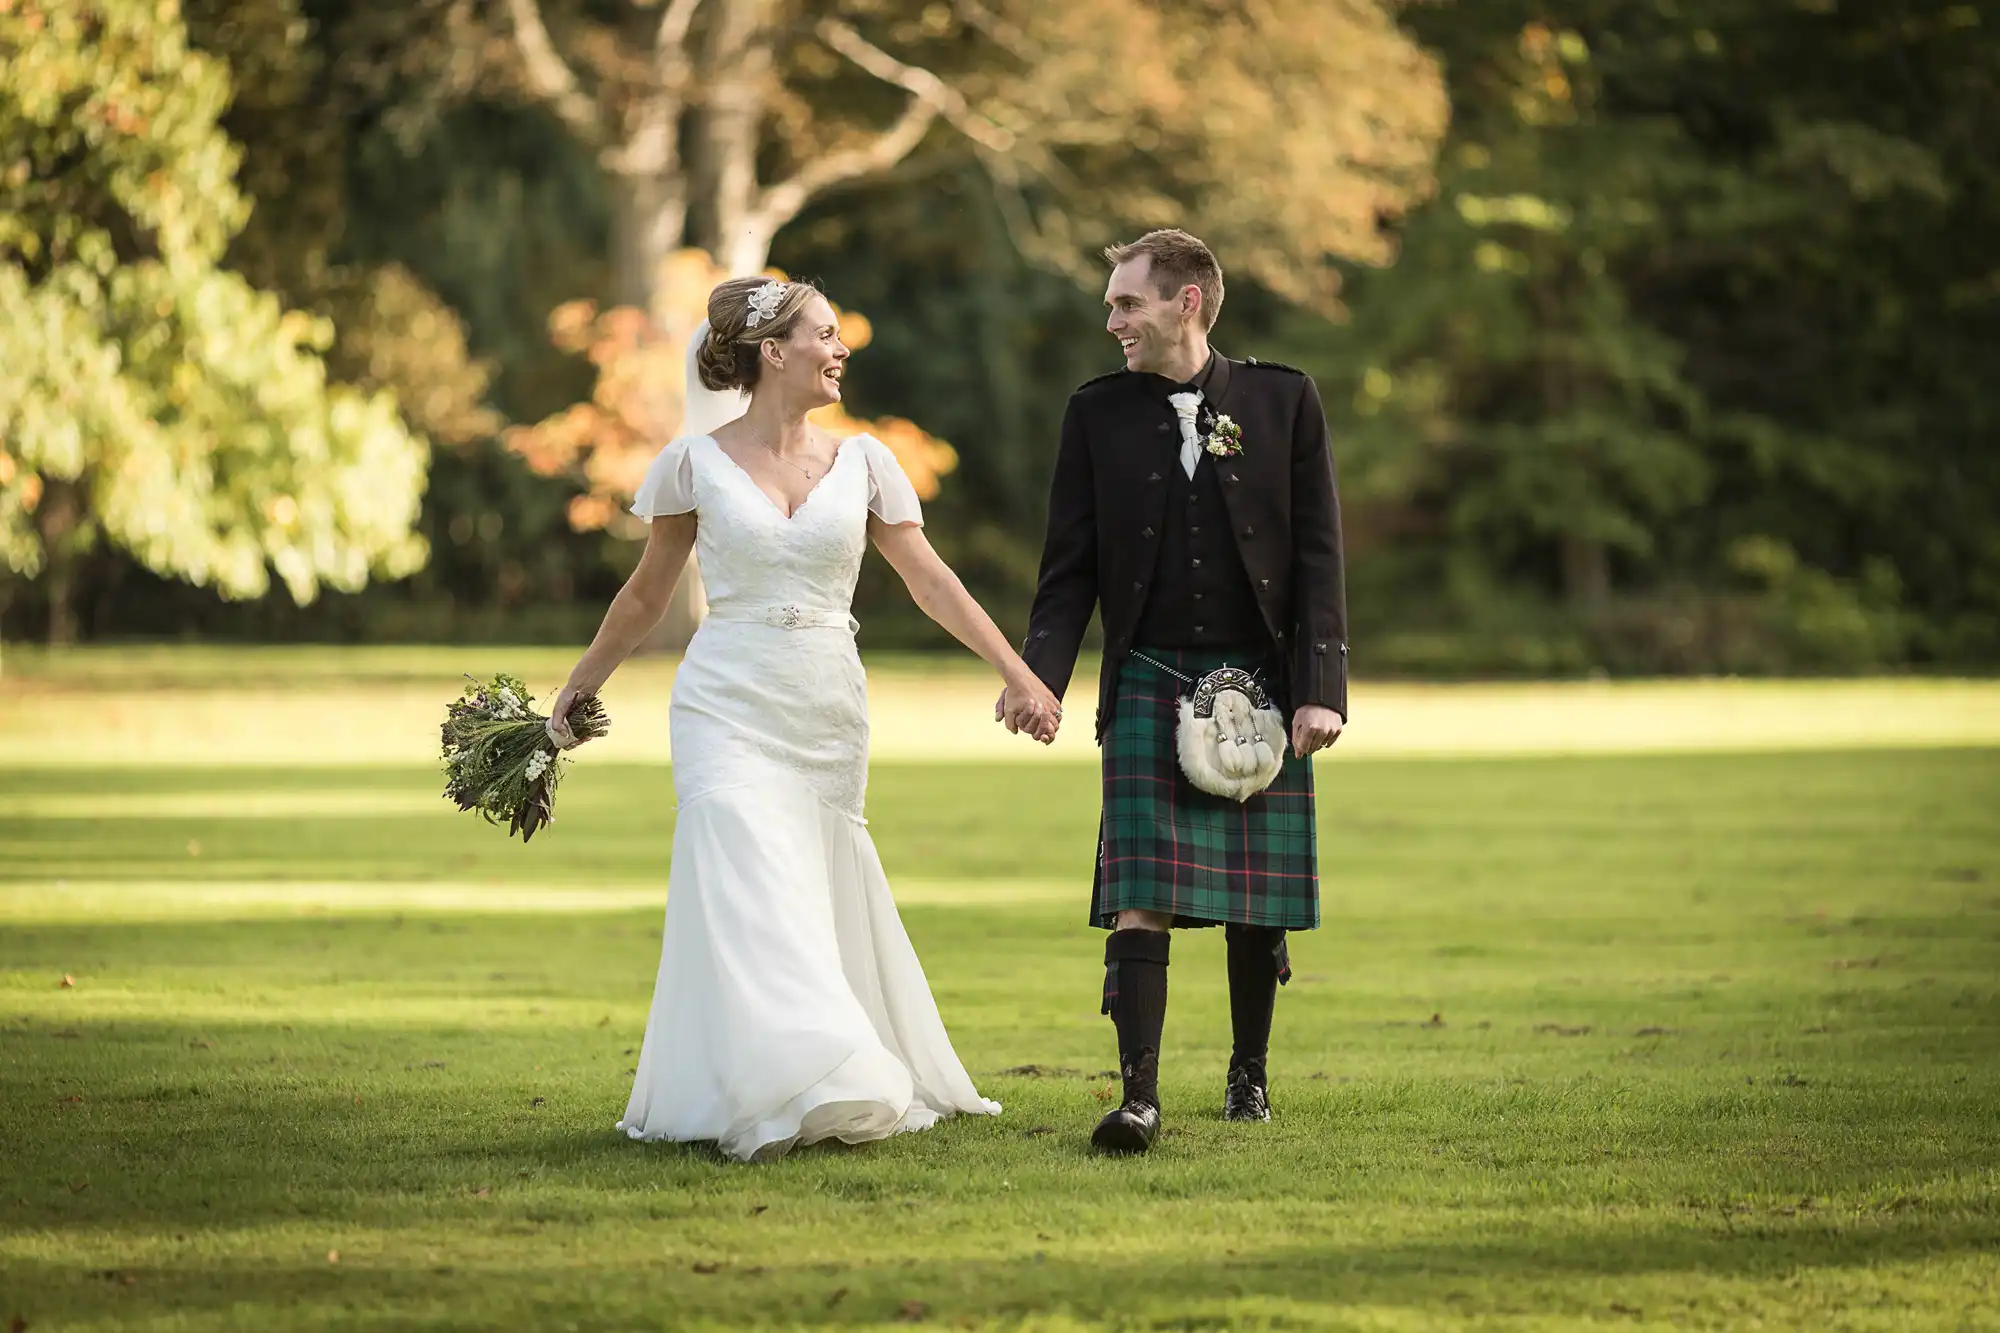 Bride in a white dress and groom in a kilt holding hands and smiling while walking through a park.